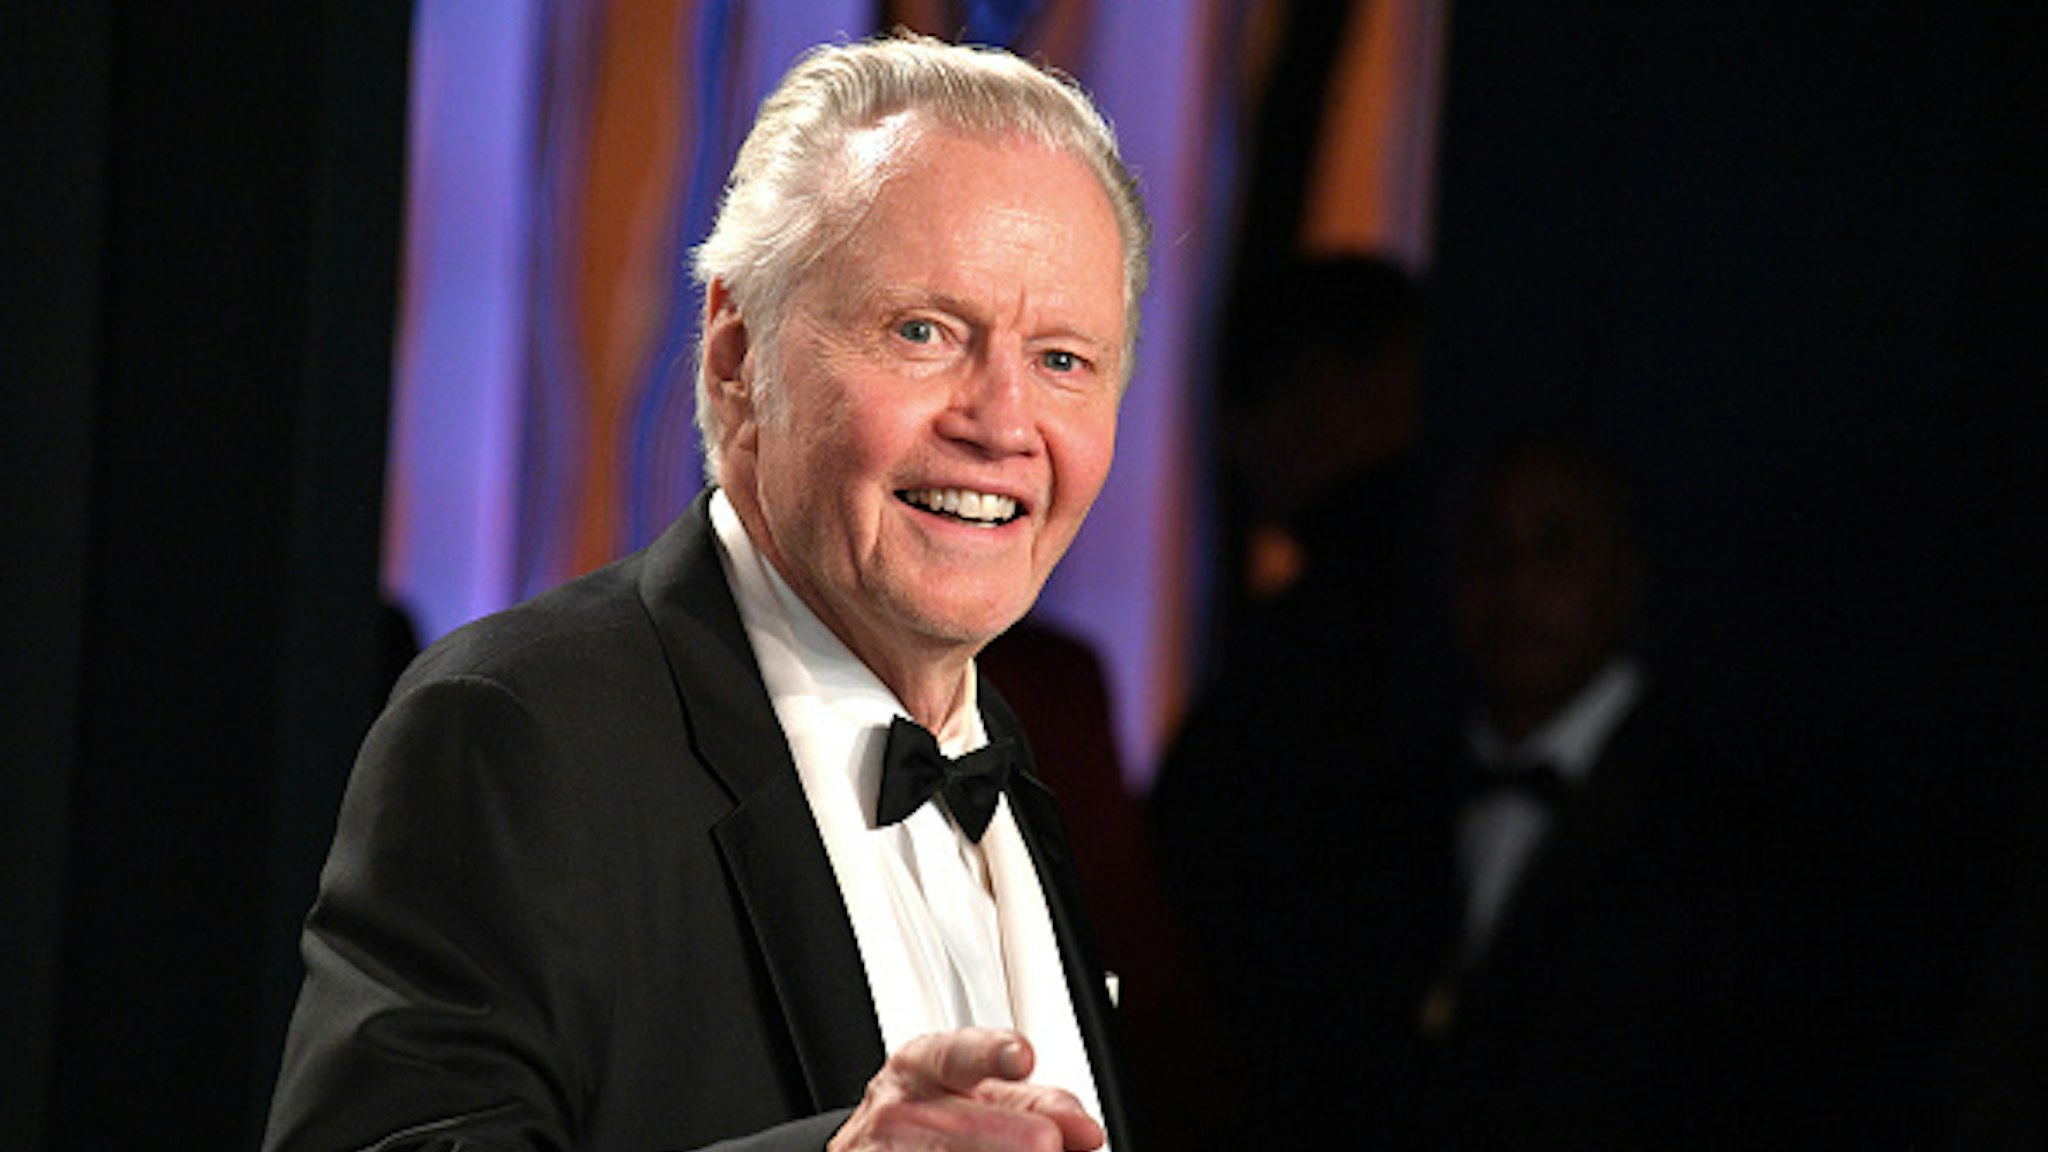 BEVERLY HILLS, CALIFORNIA - FEBRUARY 09: John Voight attends the 2020 Vanity Fair Oscar party hosted by Radhika Jones at Wallis Annenberg Center for the Performing Arts on February 09, 2020 in Beverly Hills, California.